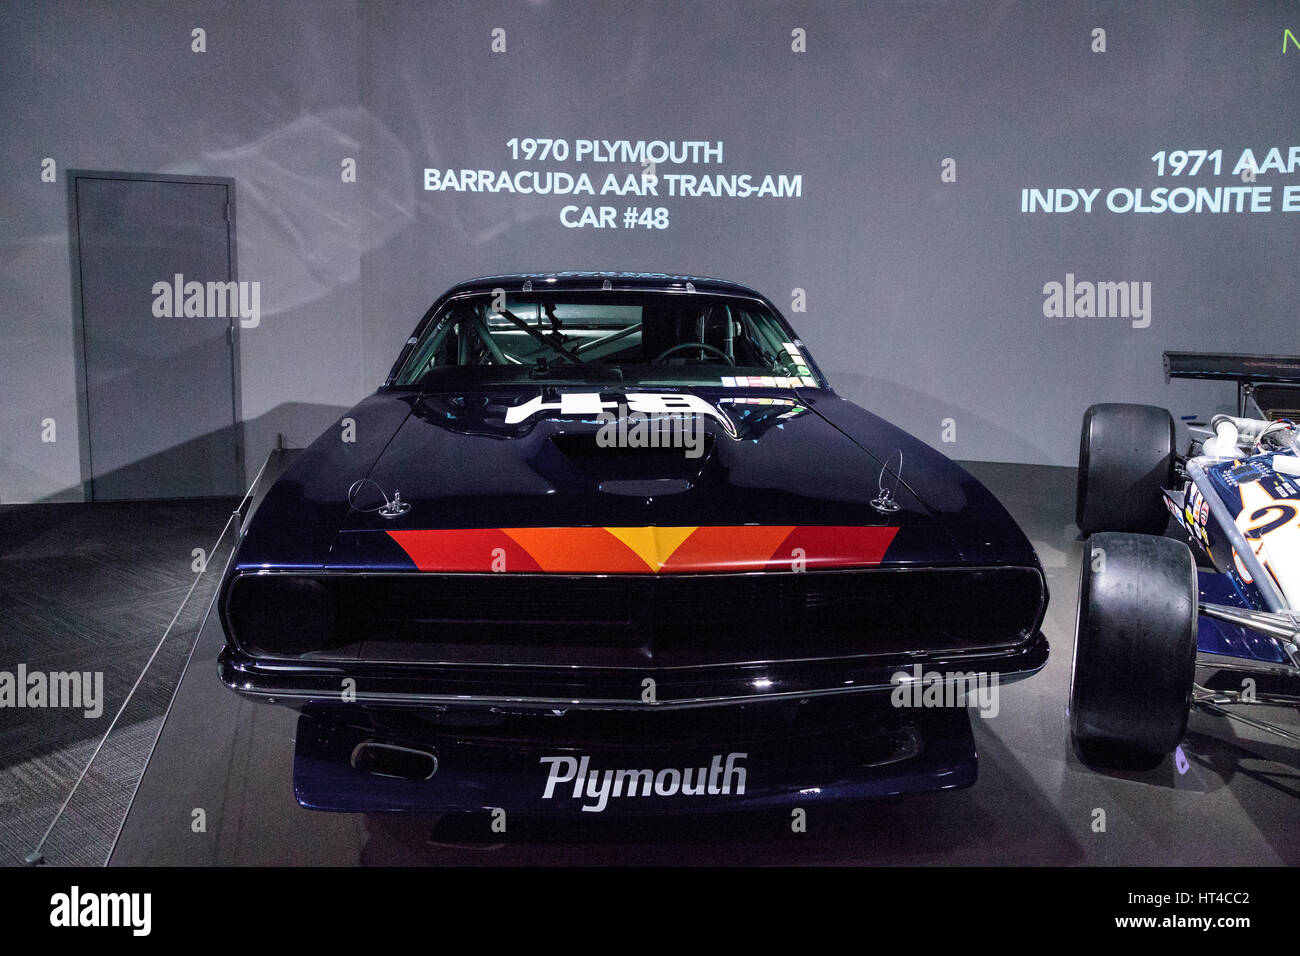 Los Angeles, CA, USA — March 4, 2017: Black 1970 Plymouth Barracuda AAR Trans-Am car number 48 at the Petersen Automotive Museum in Los Angeles, Calif Stock Photo